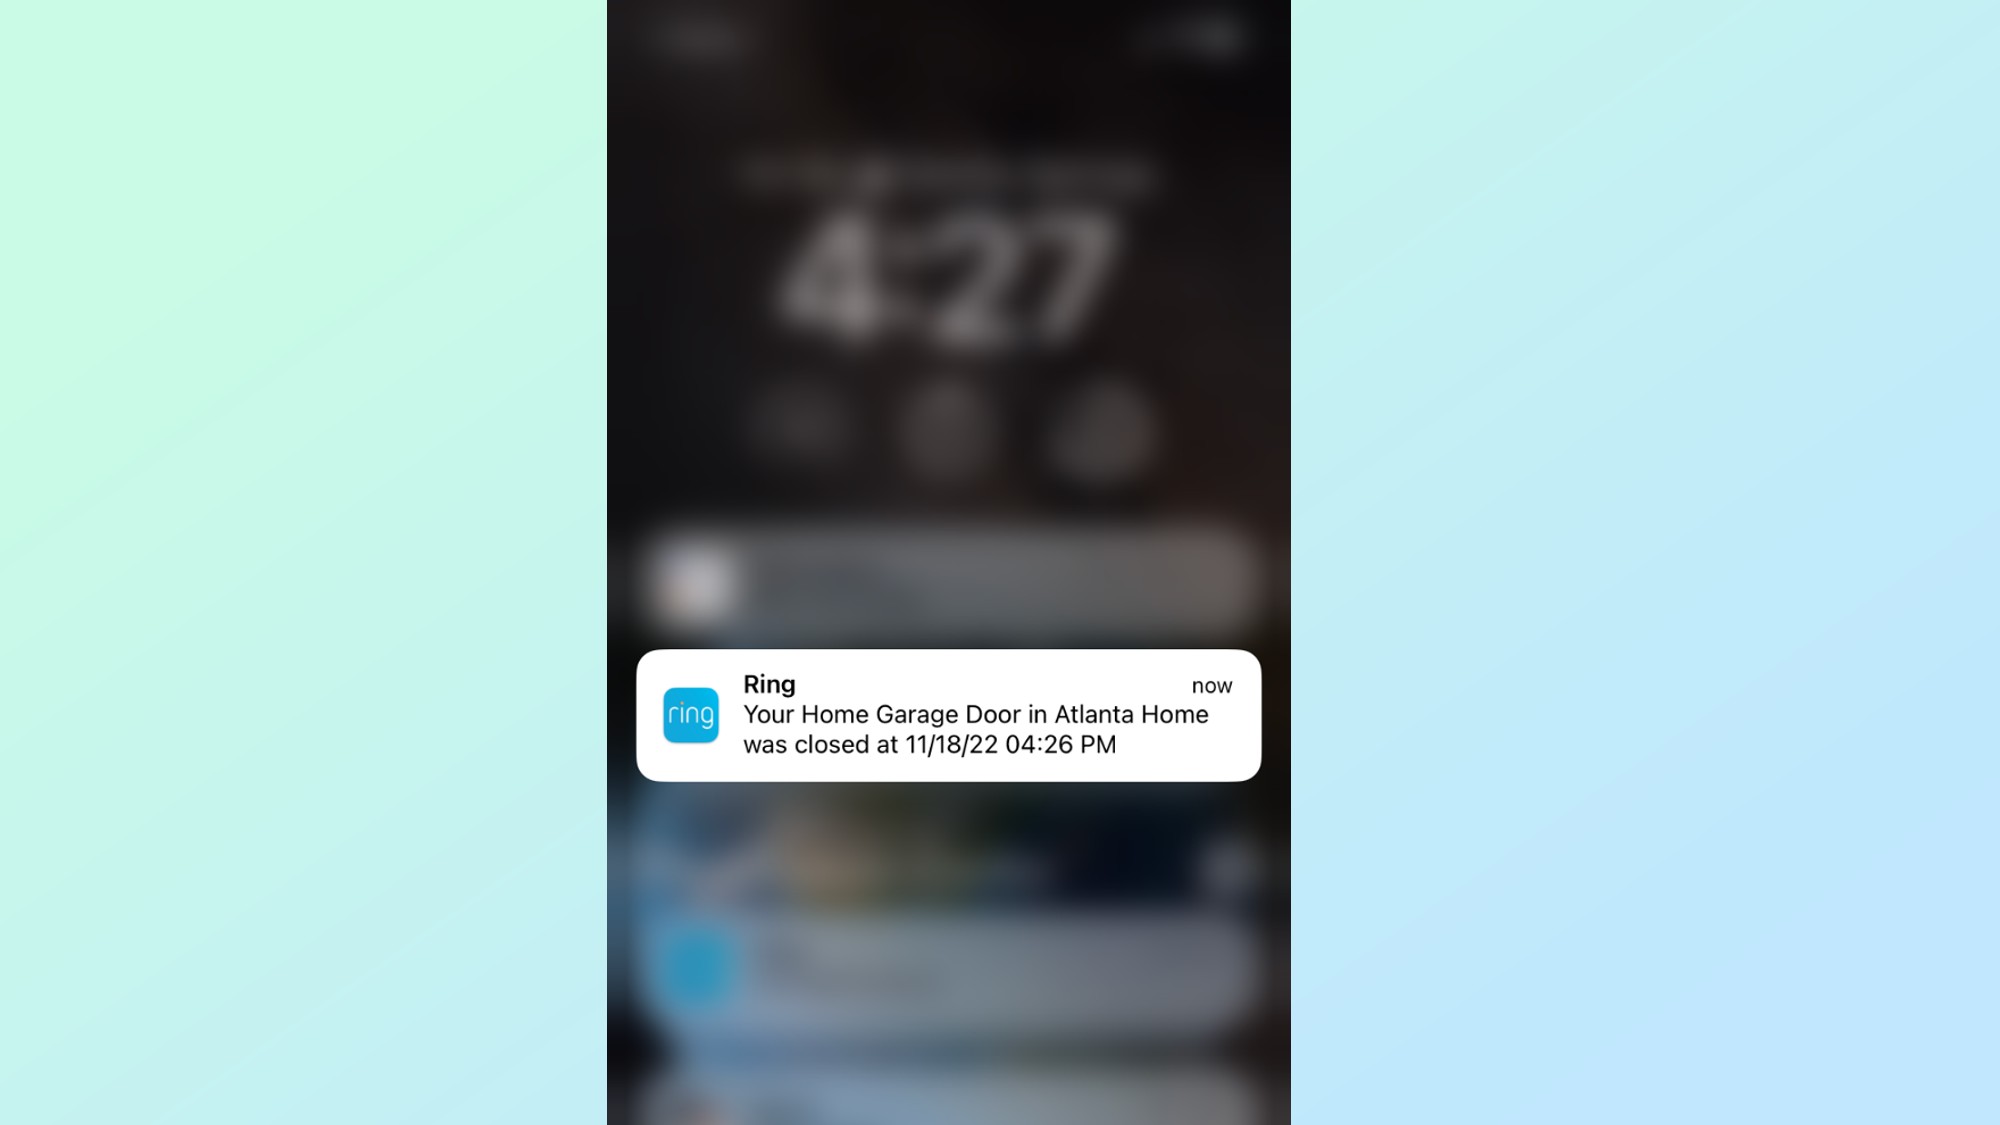 Play a screenshot of the app's notification